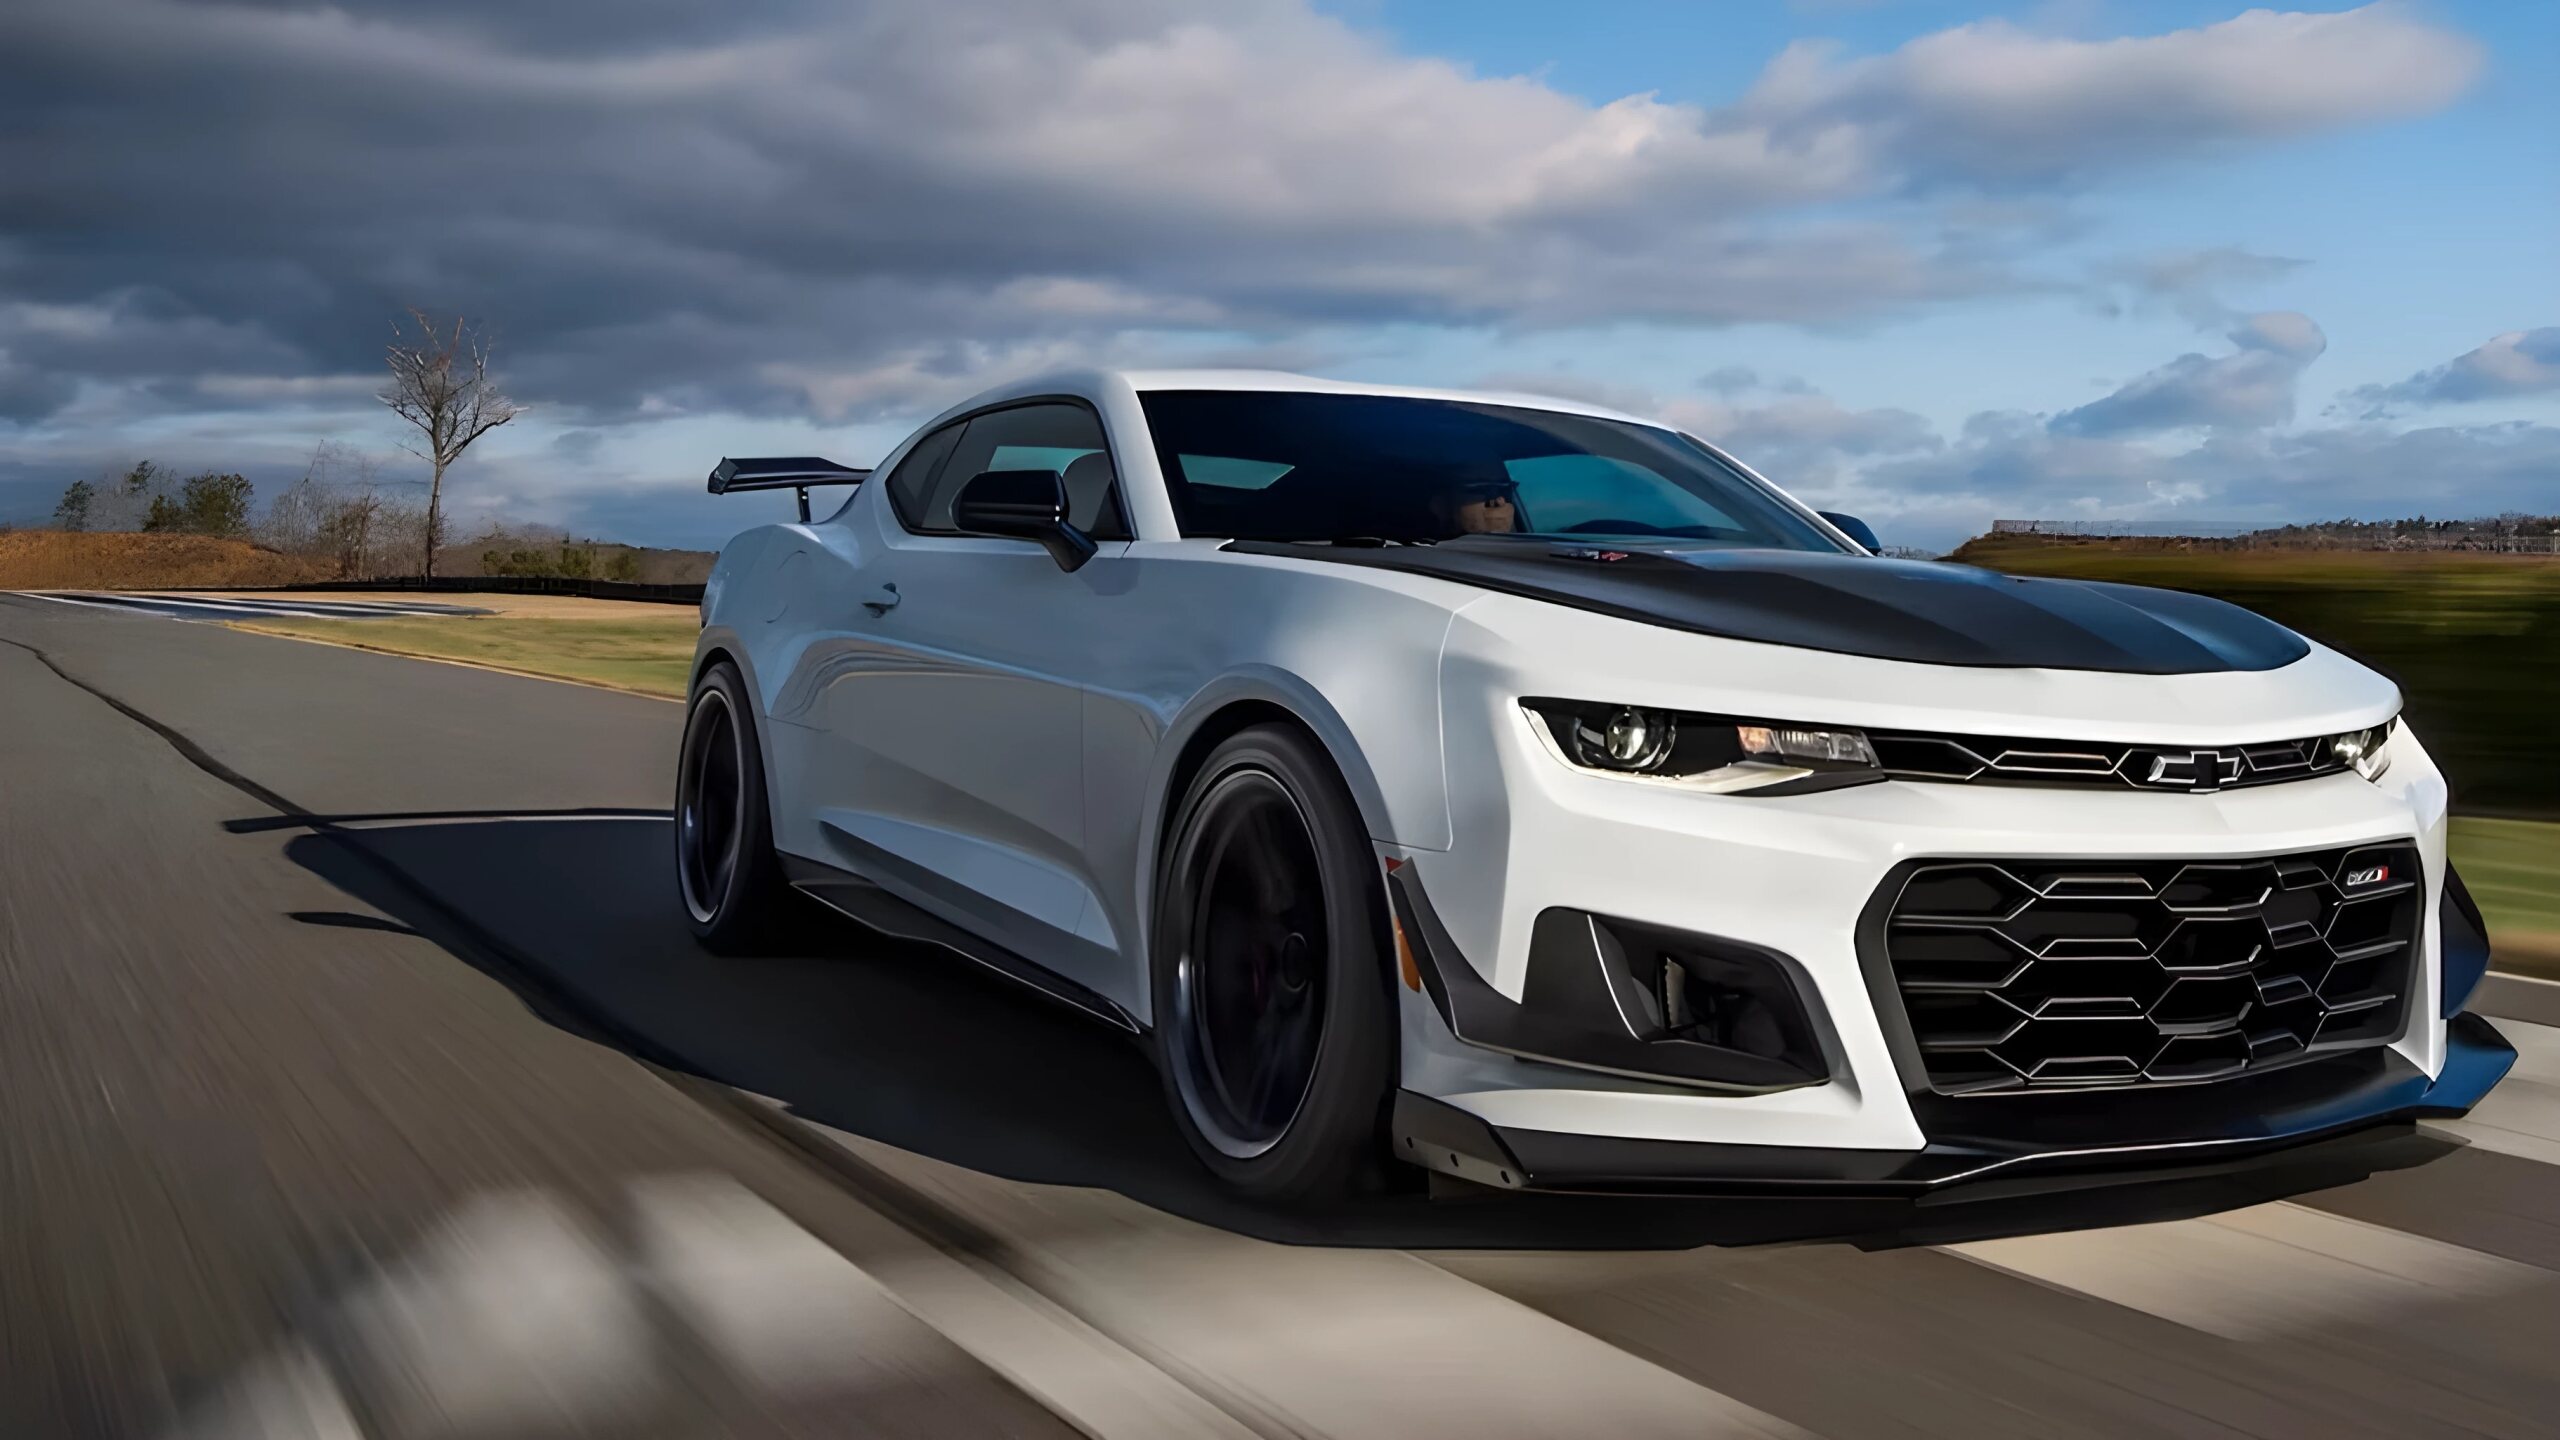 A The Front And Side Profiles Of The 2024 Chevrolet Camaro - Exterior Shade Summit White With A Visible Carbon Fiber Weave Hood Insert